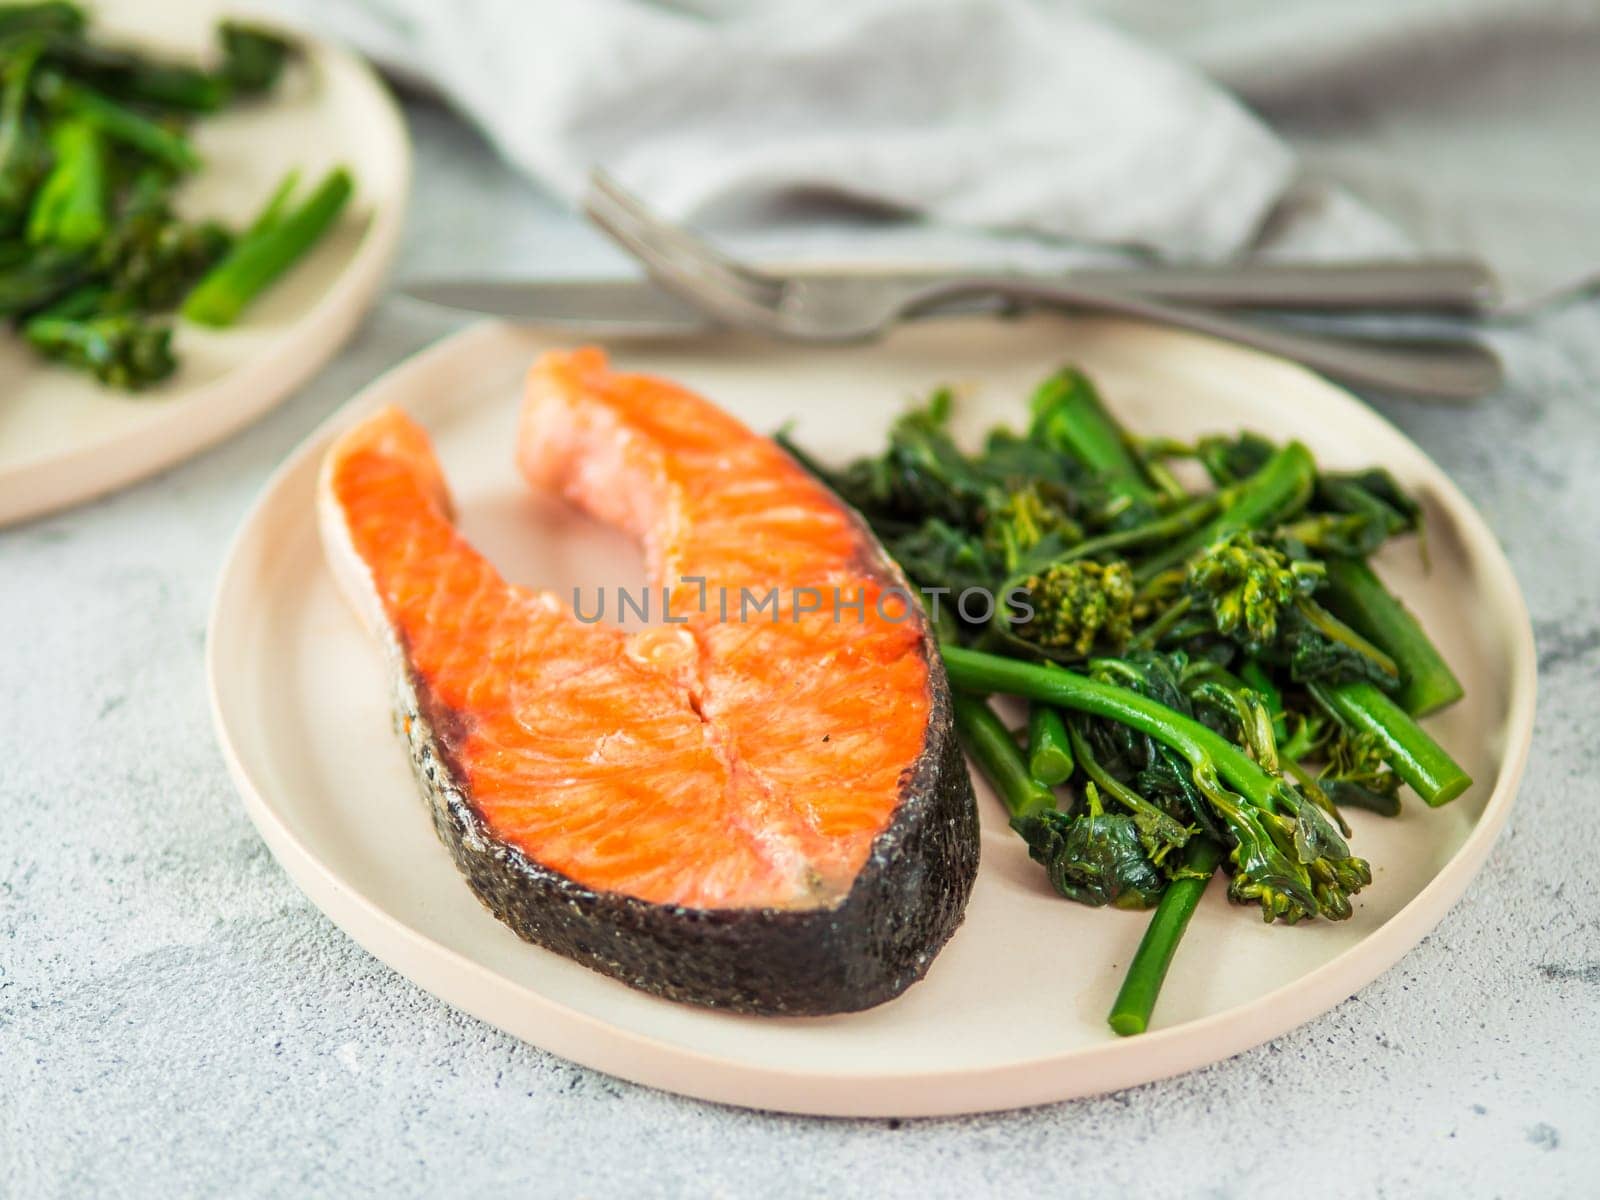 Ready-to-eat grilled salmon steak and greens - baby broccoli or broccolini and spinach on rustic craft plate over gray background. Keto diet dish.